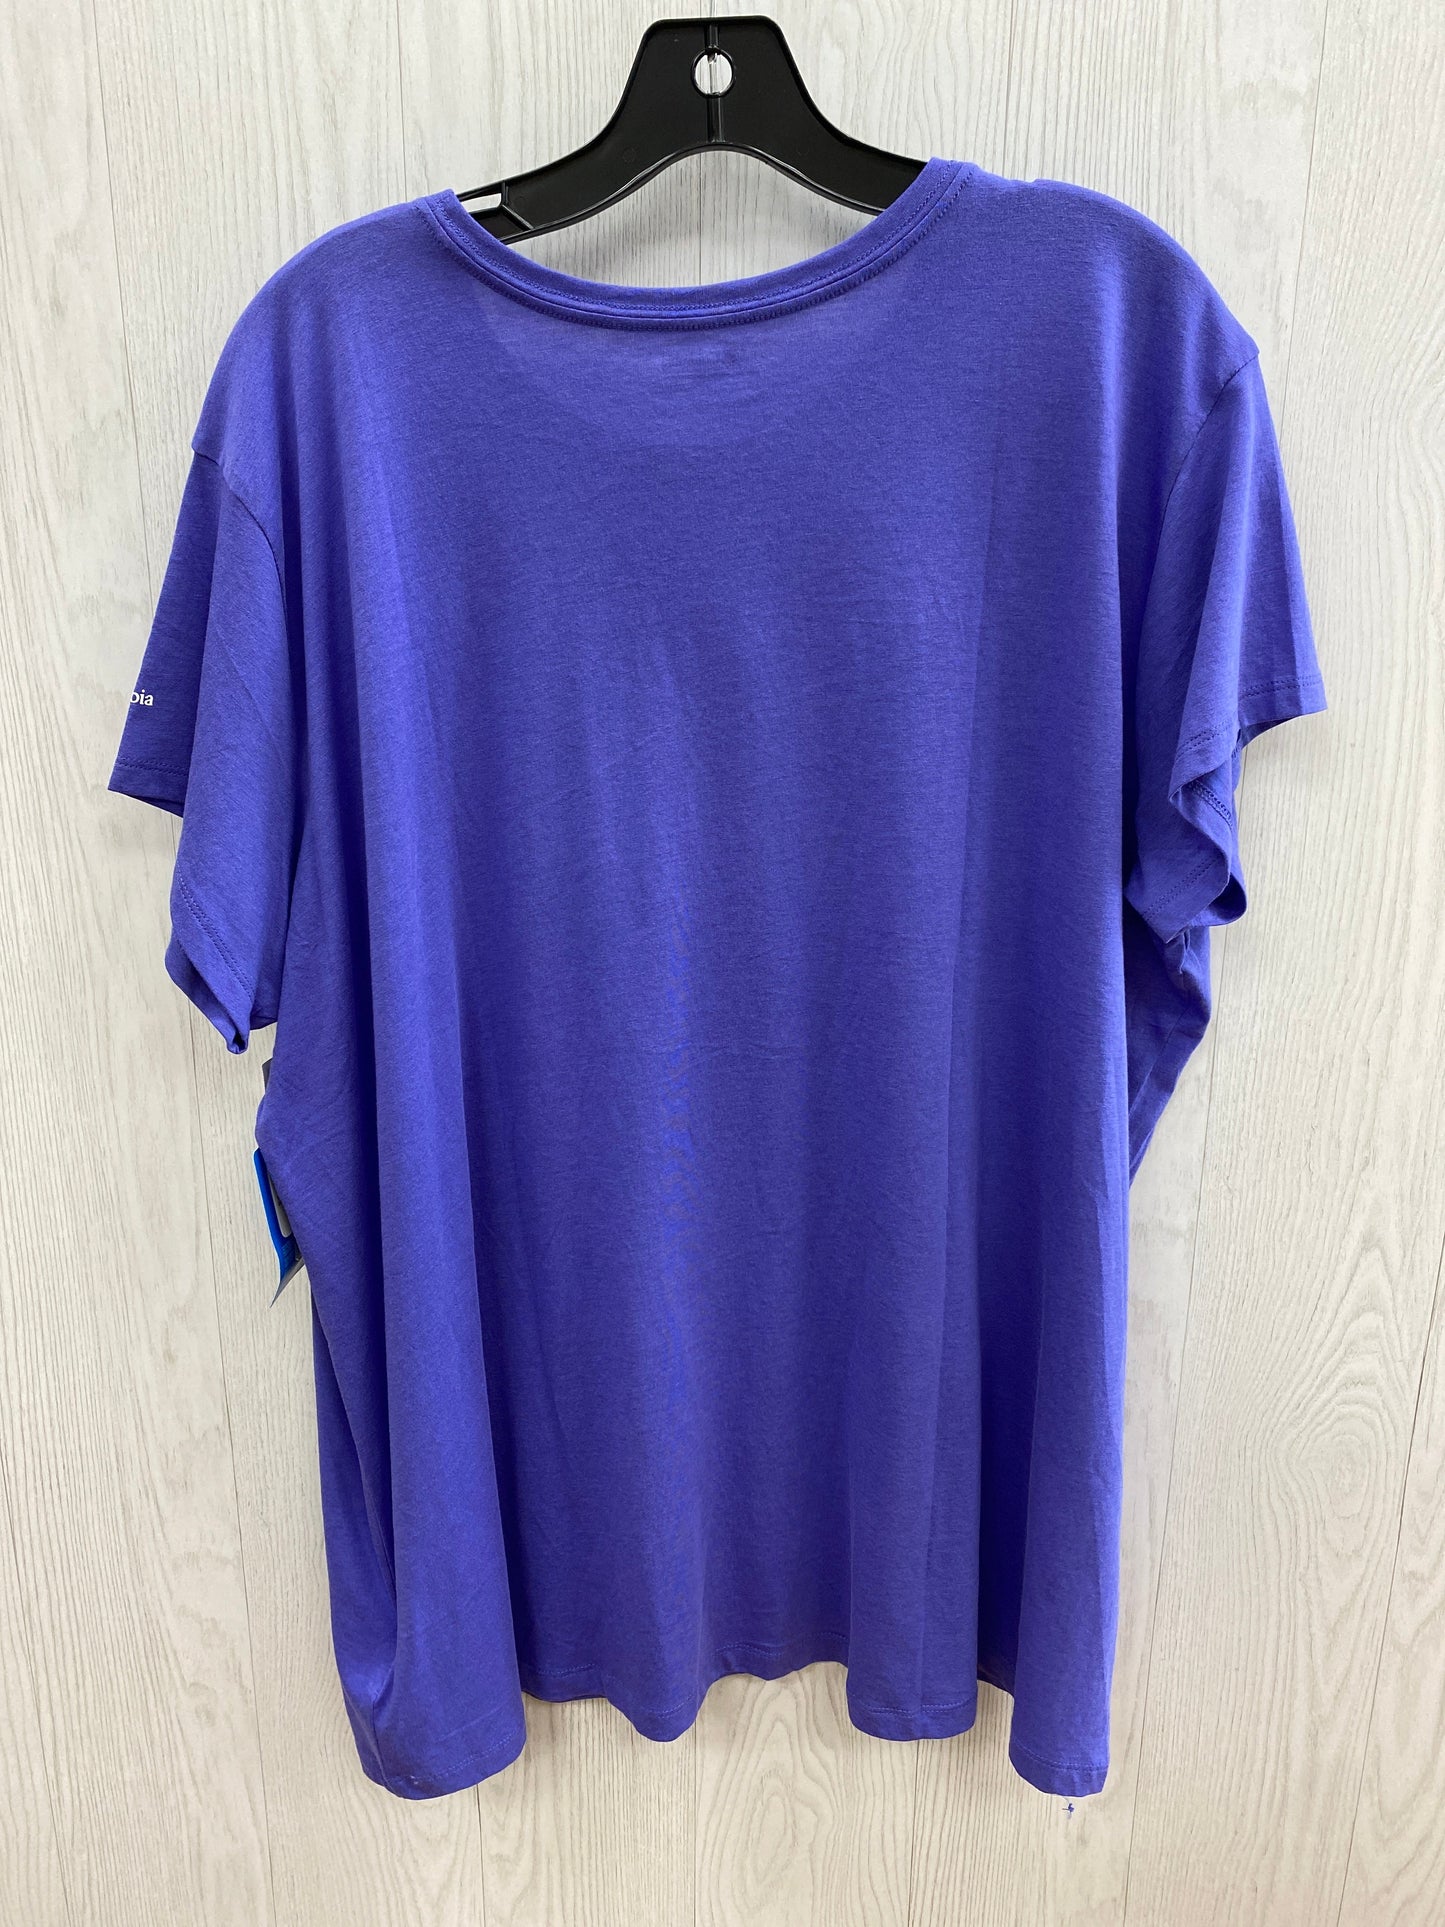 Athletic Top Short Sleeve By Columbia  Size: 3x